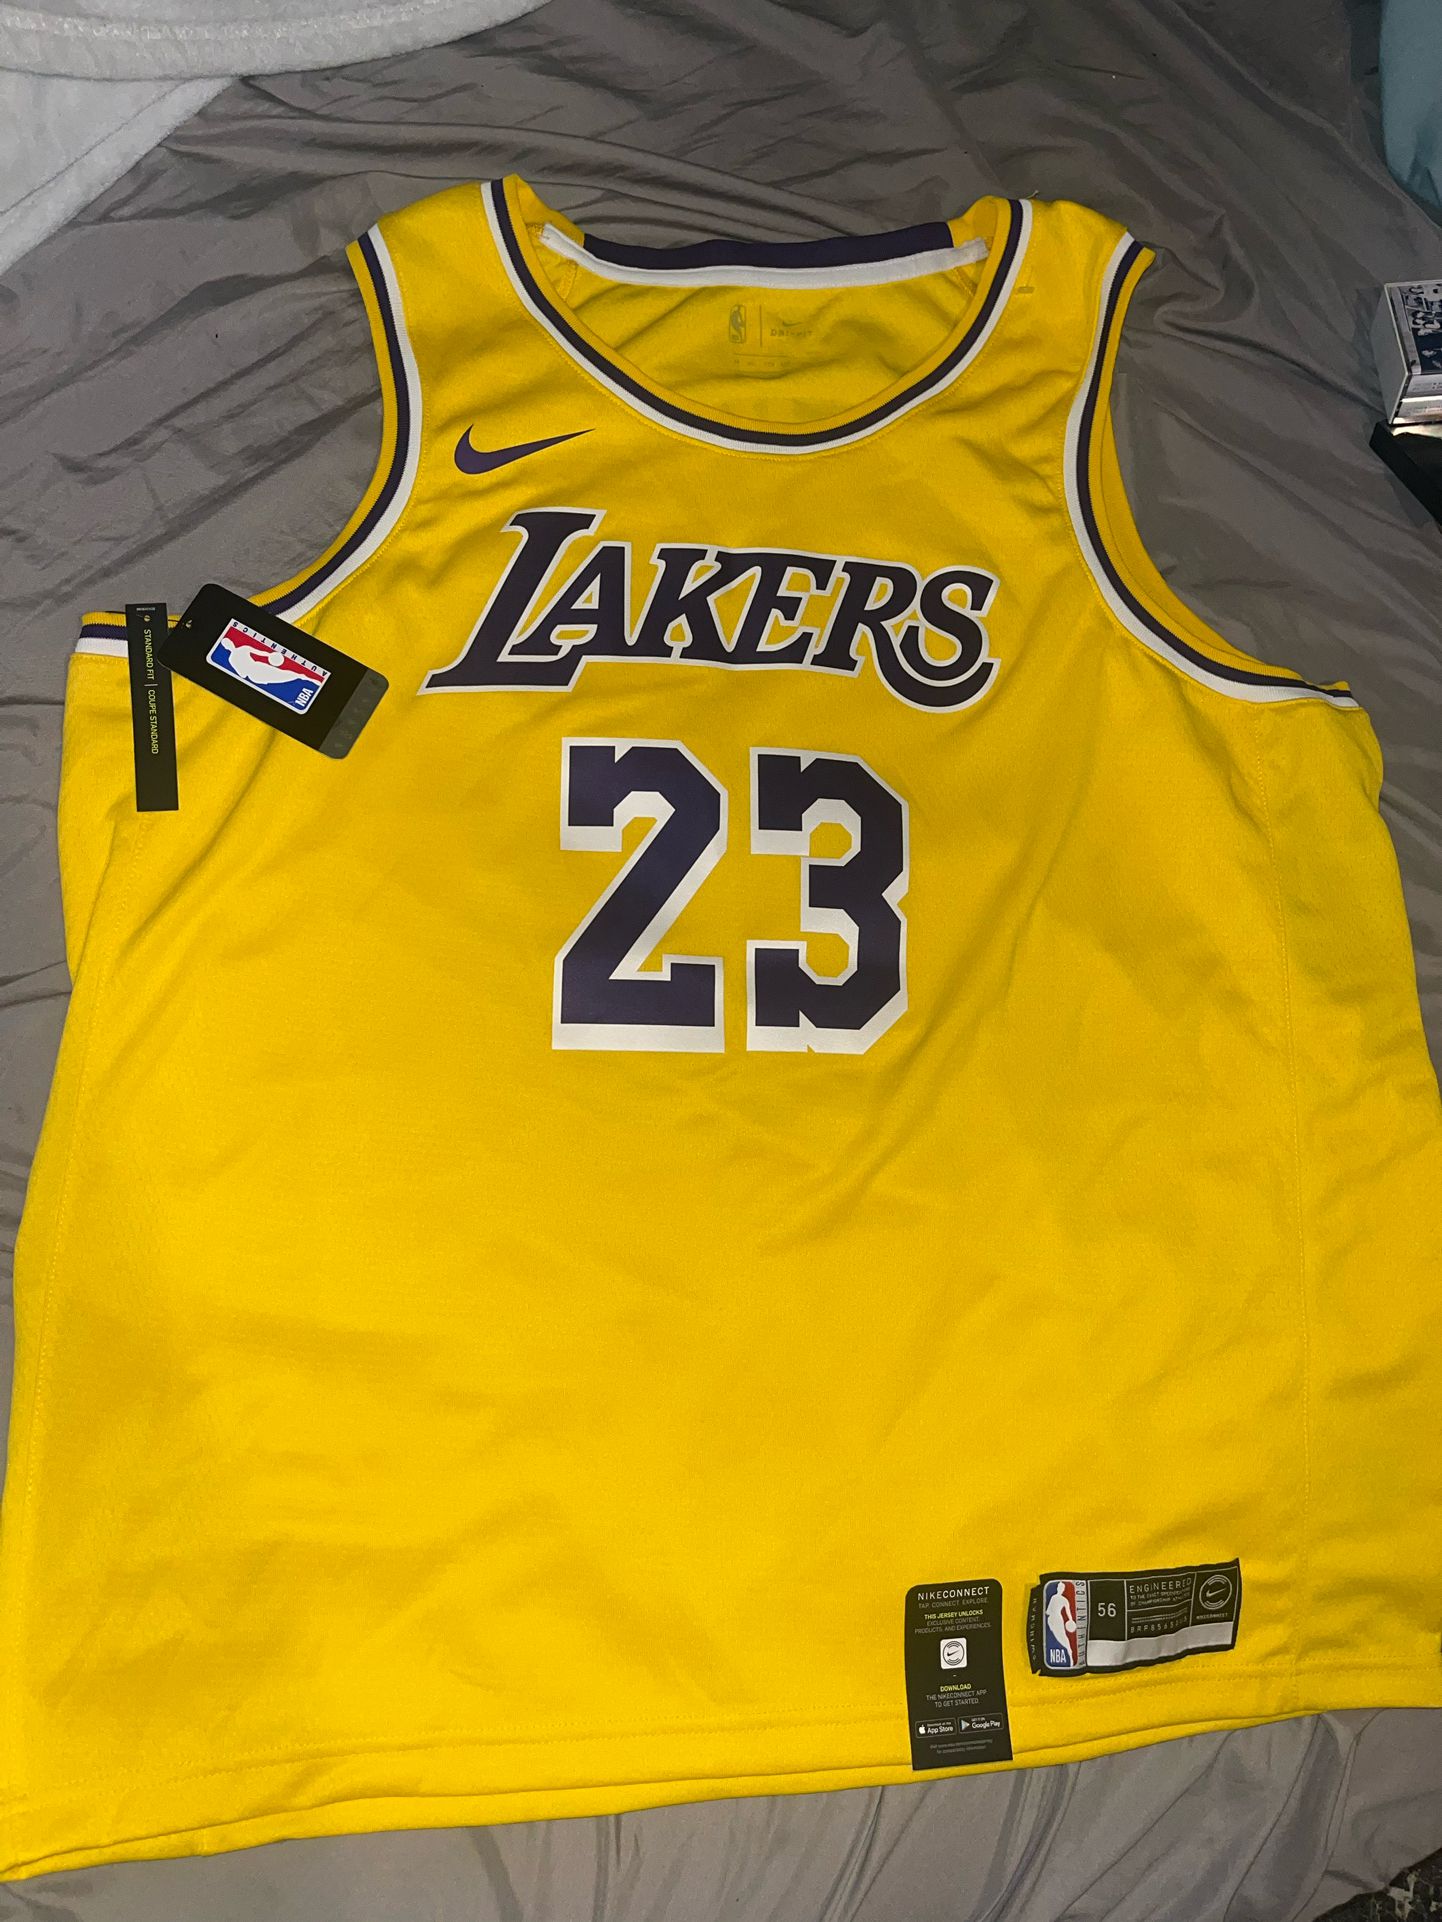 Lebron James Los Angeles Lakers Nike Jersey Size 56 2XL Authentic 